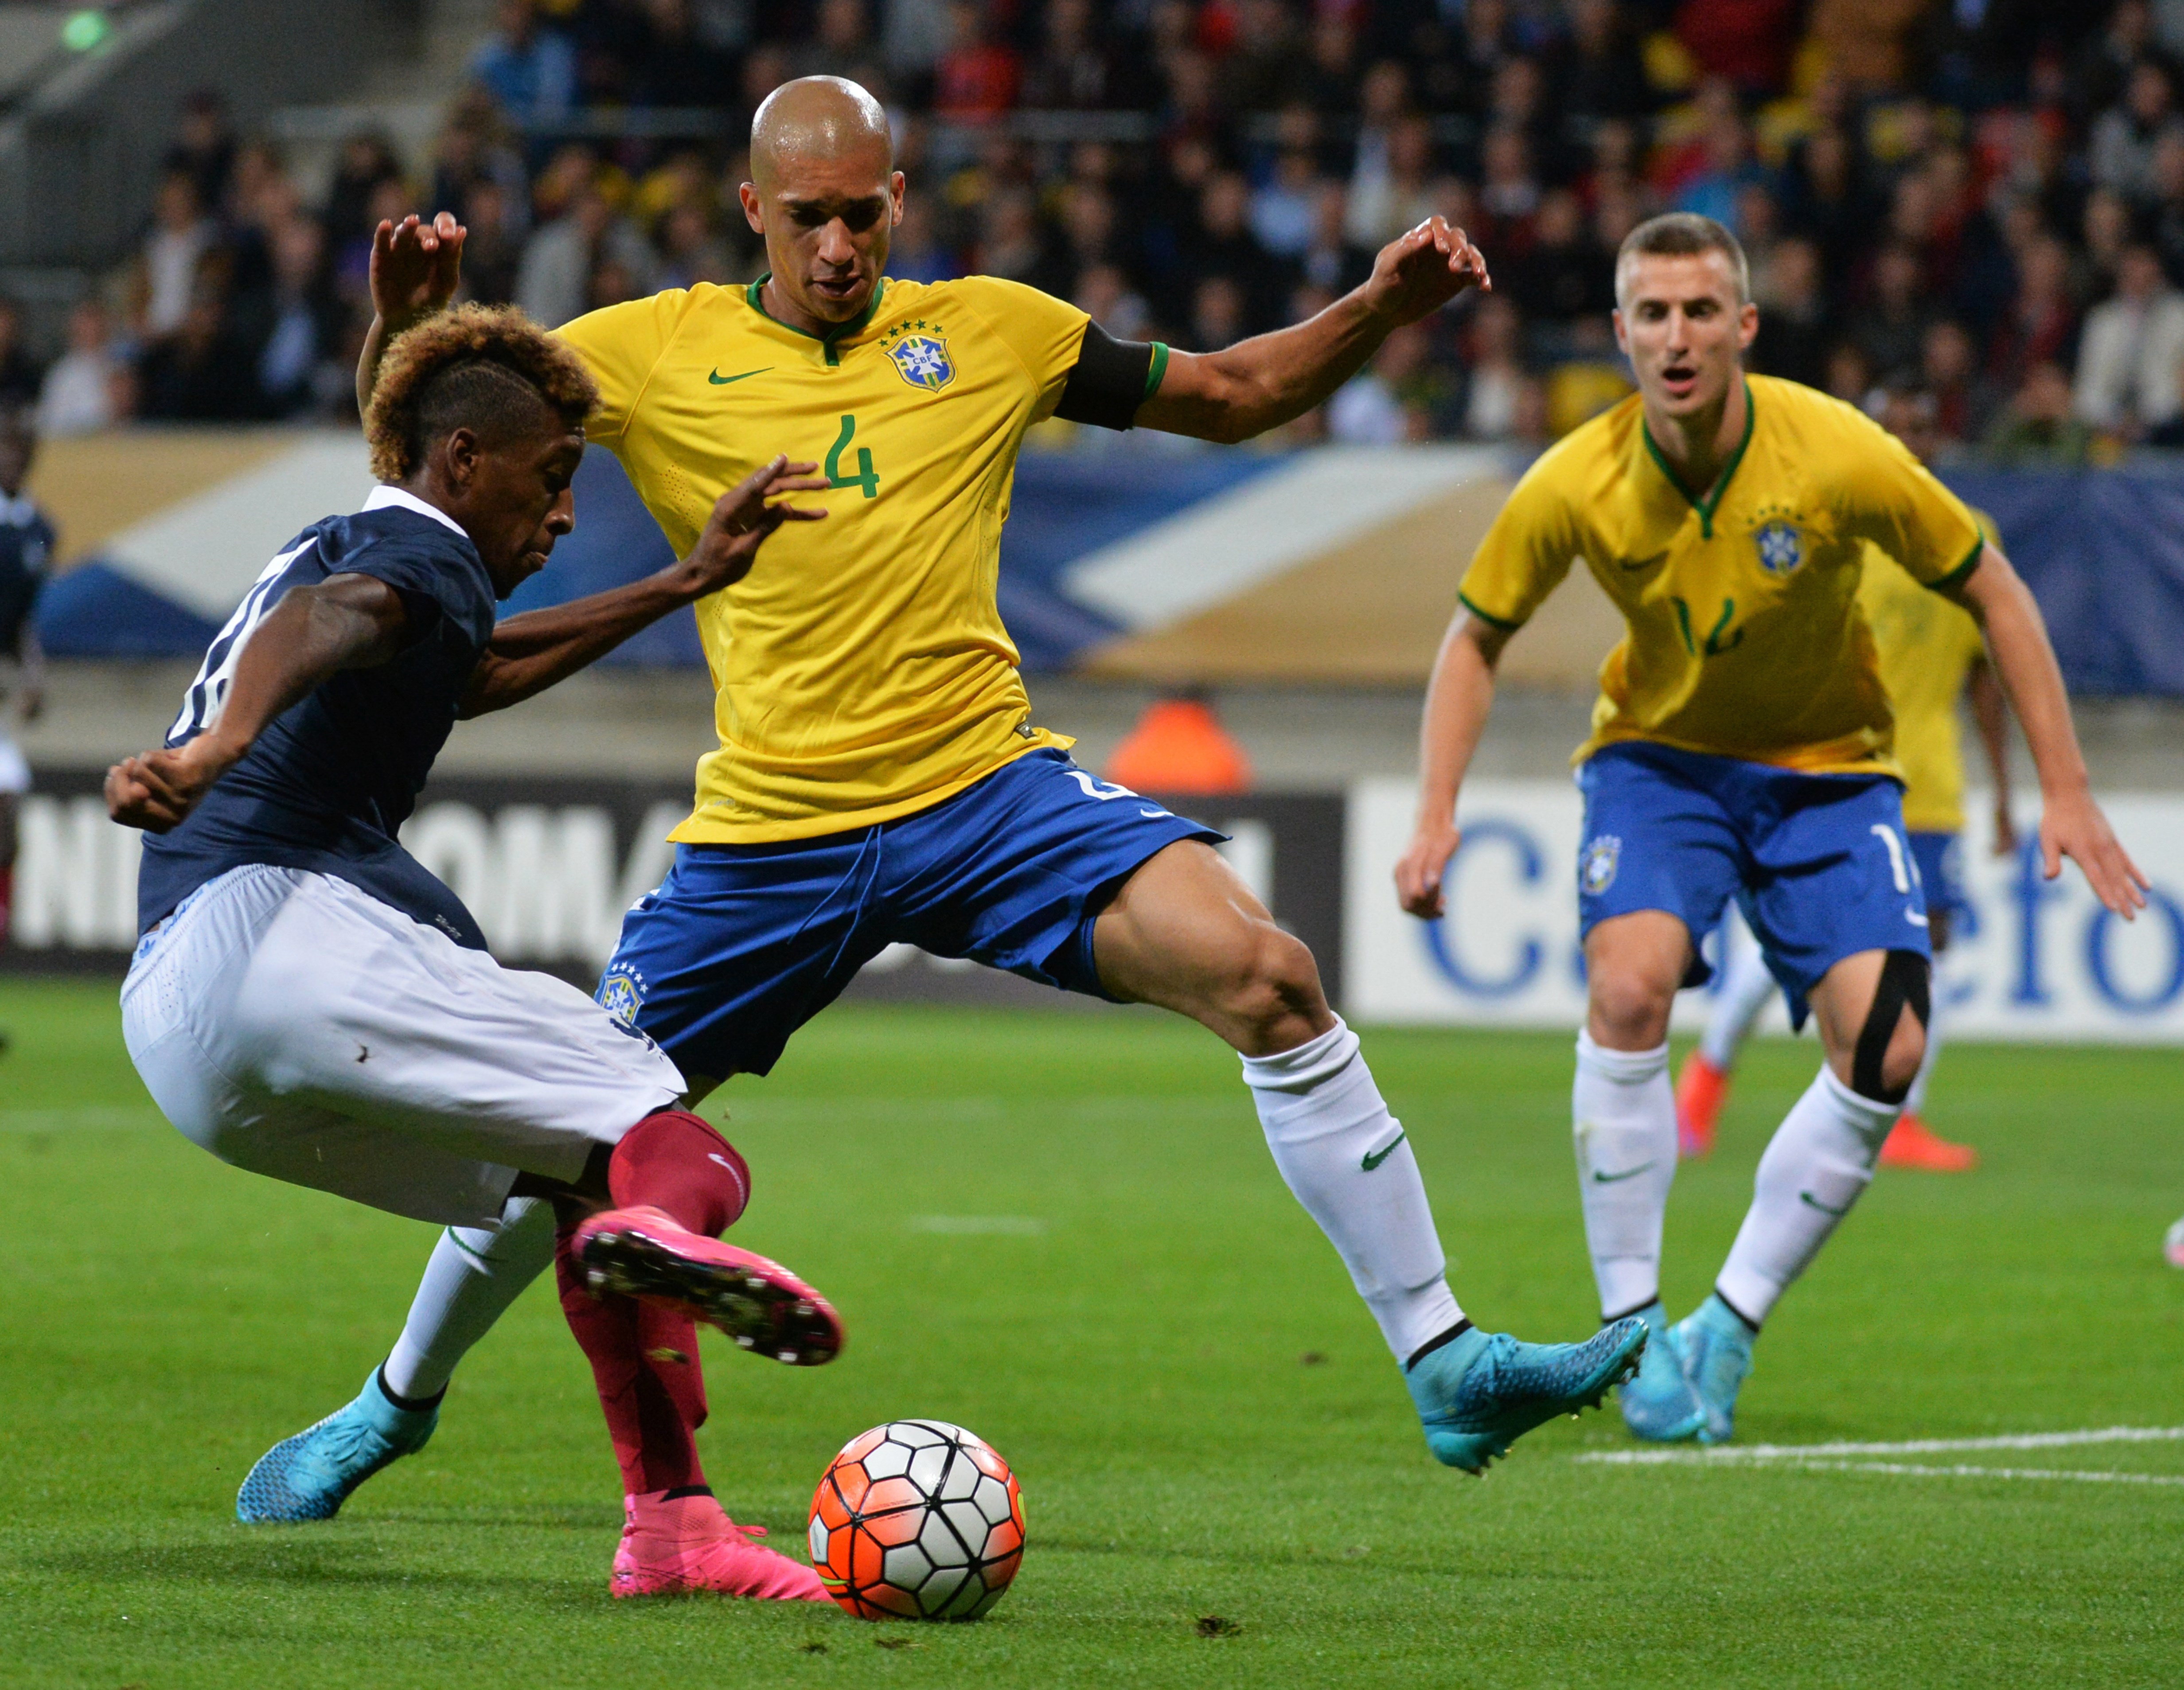 France's forward Kingsley Coman (L) vies for the ball with Brazil's defender Doria (C) during the International friendly Under 21 football match France vs Brazil on September 8, 2015, at the MMArena Stadium in Le Mans, western France. AFP PHOTO/ JEAN-FRANCOIS MONIER        (Photo credit should read JEAN-FRANCOIS MONIER/AFP/Getty Images)